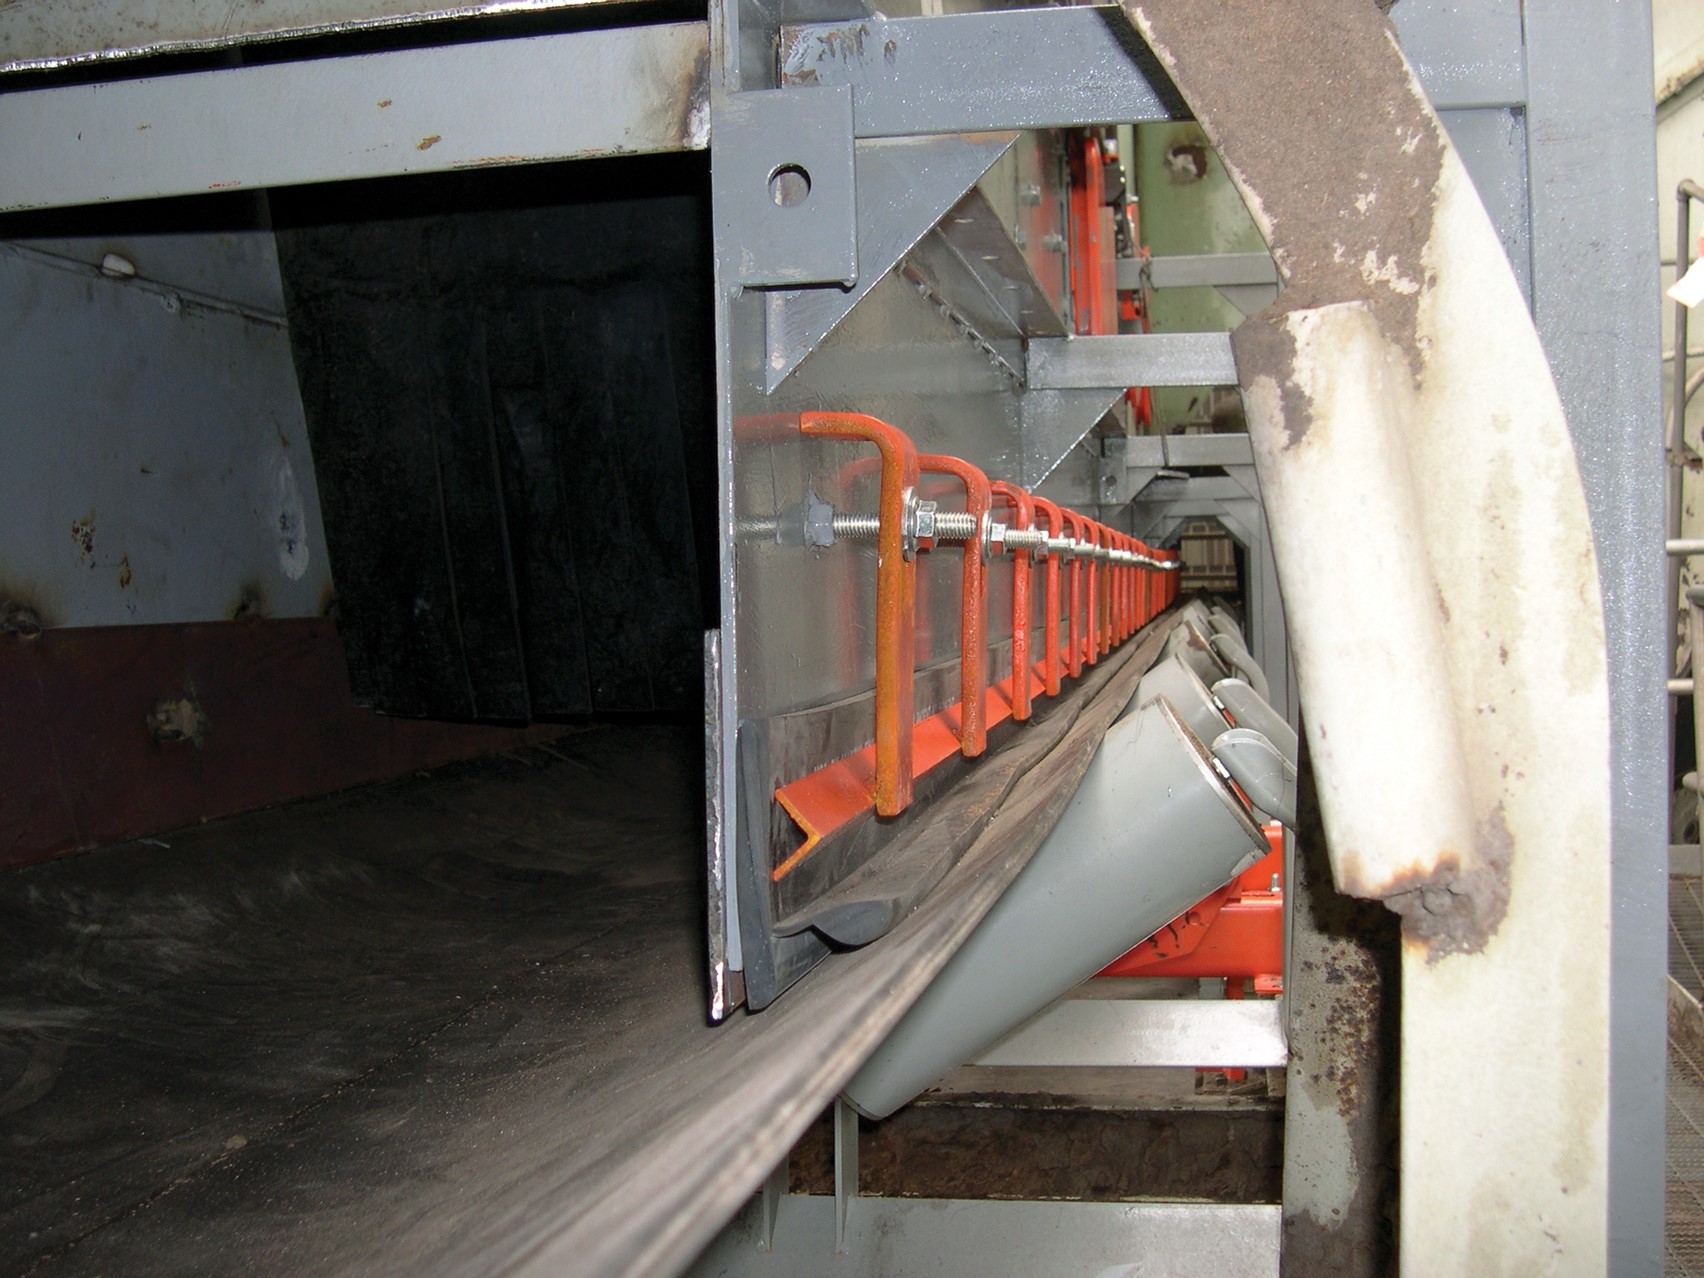 Internal wear liner can require confined space entry